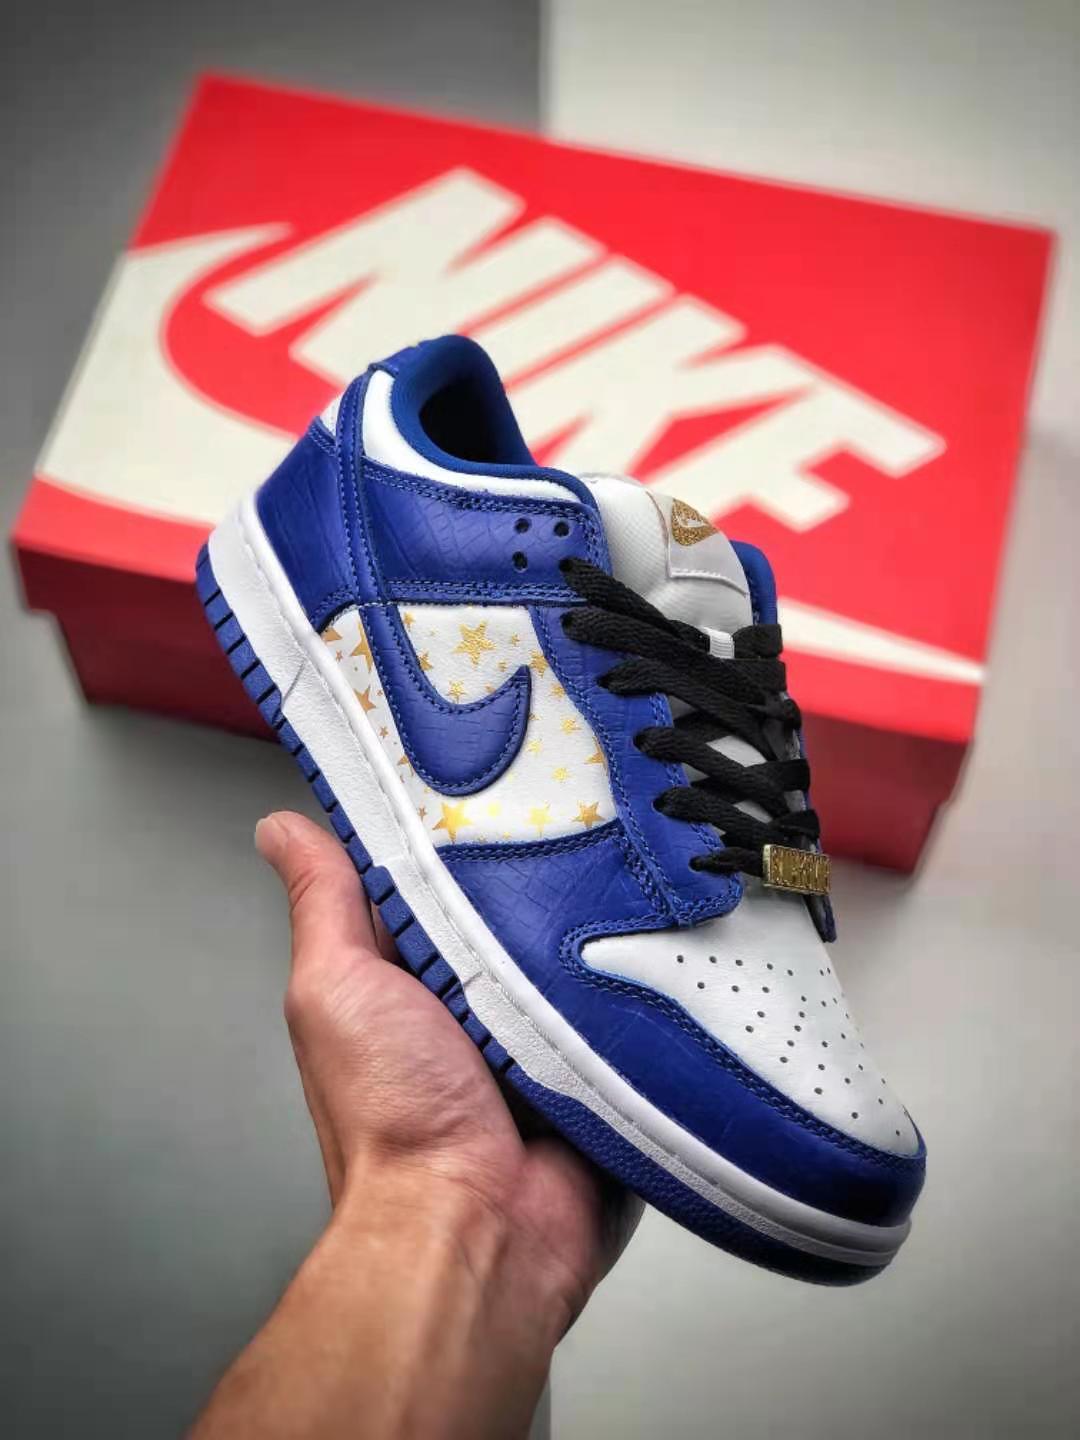 Nike SB Dunk Low Supreme Stars Hyper Royal Metallic Gold White DH3228-100: Shop Now at the Ultimate Online Store for Limited Edition Sneakers!